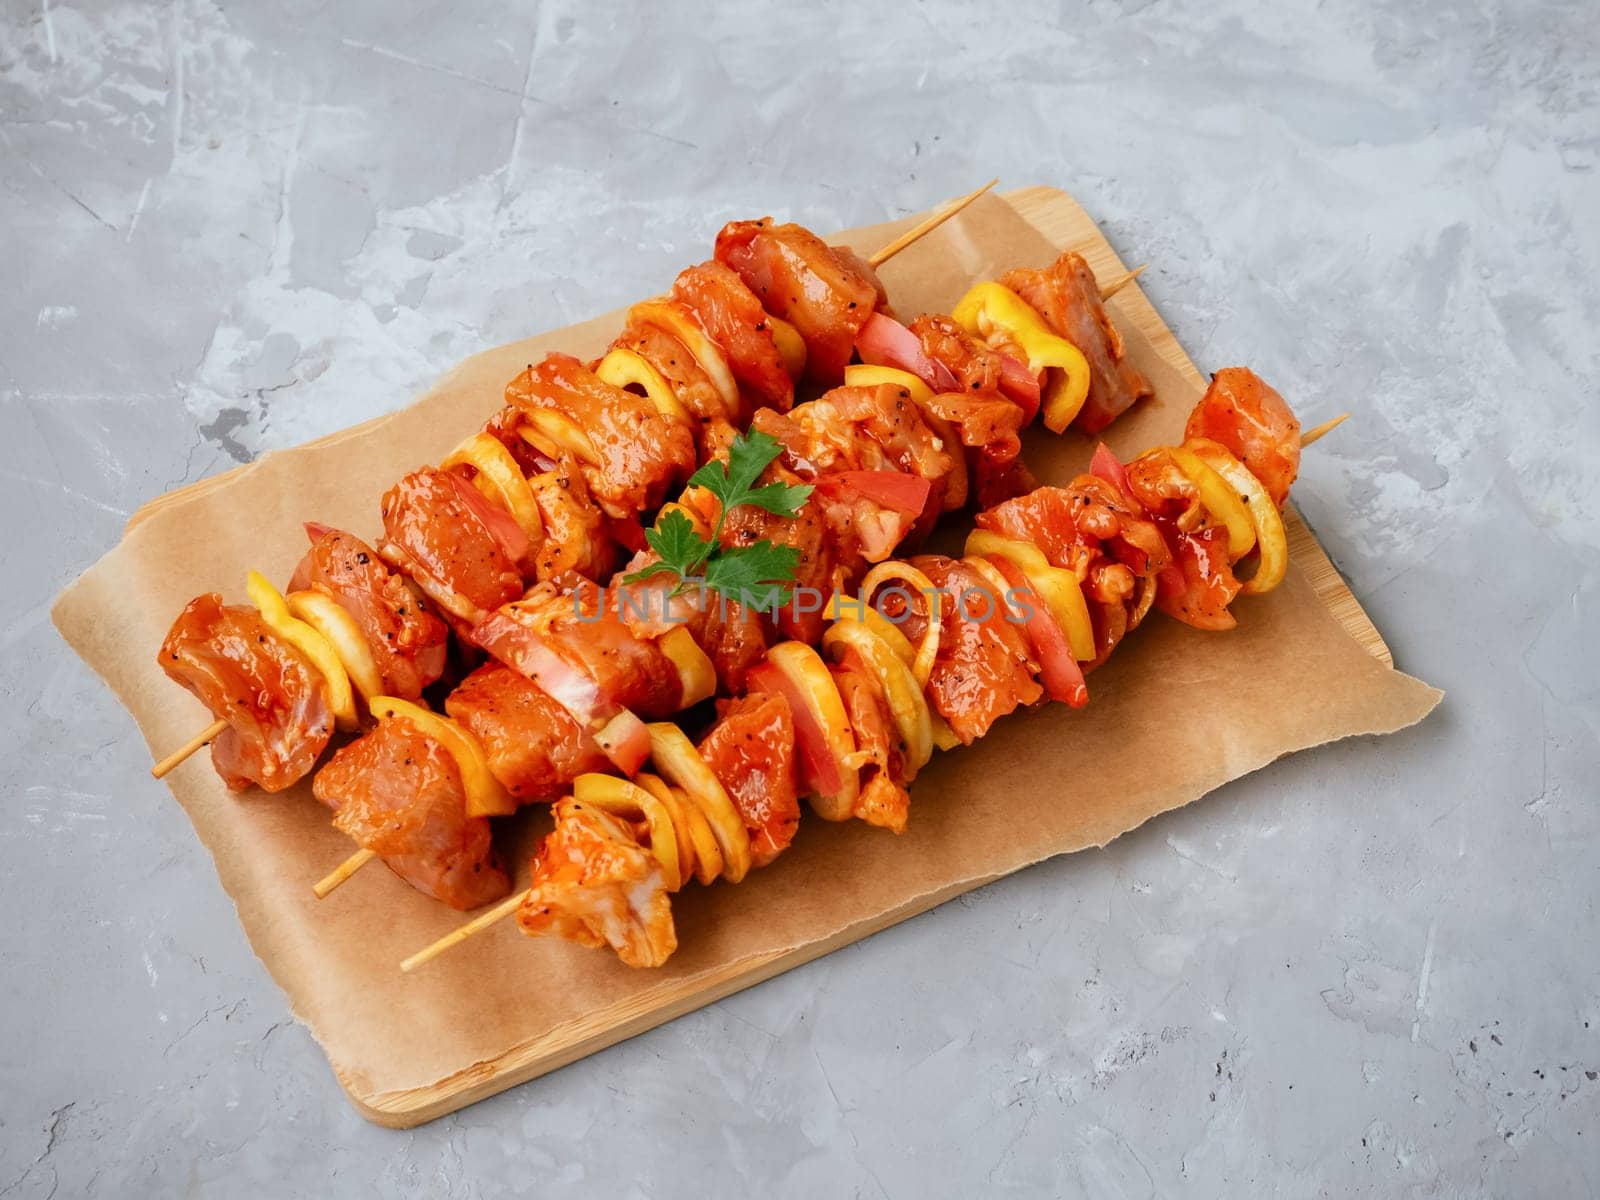 Uncooked marinated and rubbed chiken or turkey shish kebabs on skewers with onion, pepper and tomato ready for grilling or BBQ. Raw meat in a marinade with spices on cutting board. Soft focus by Halina